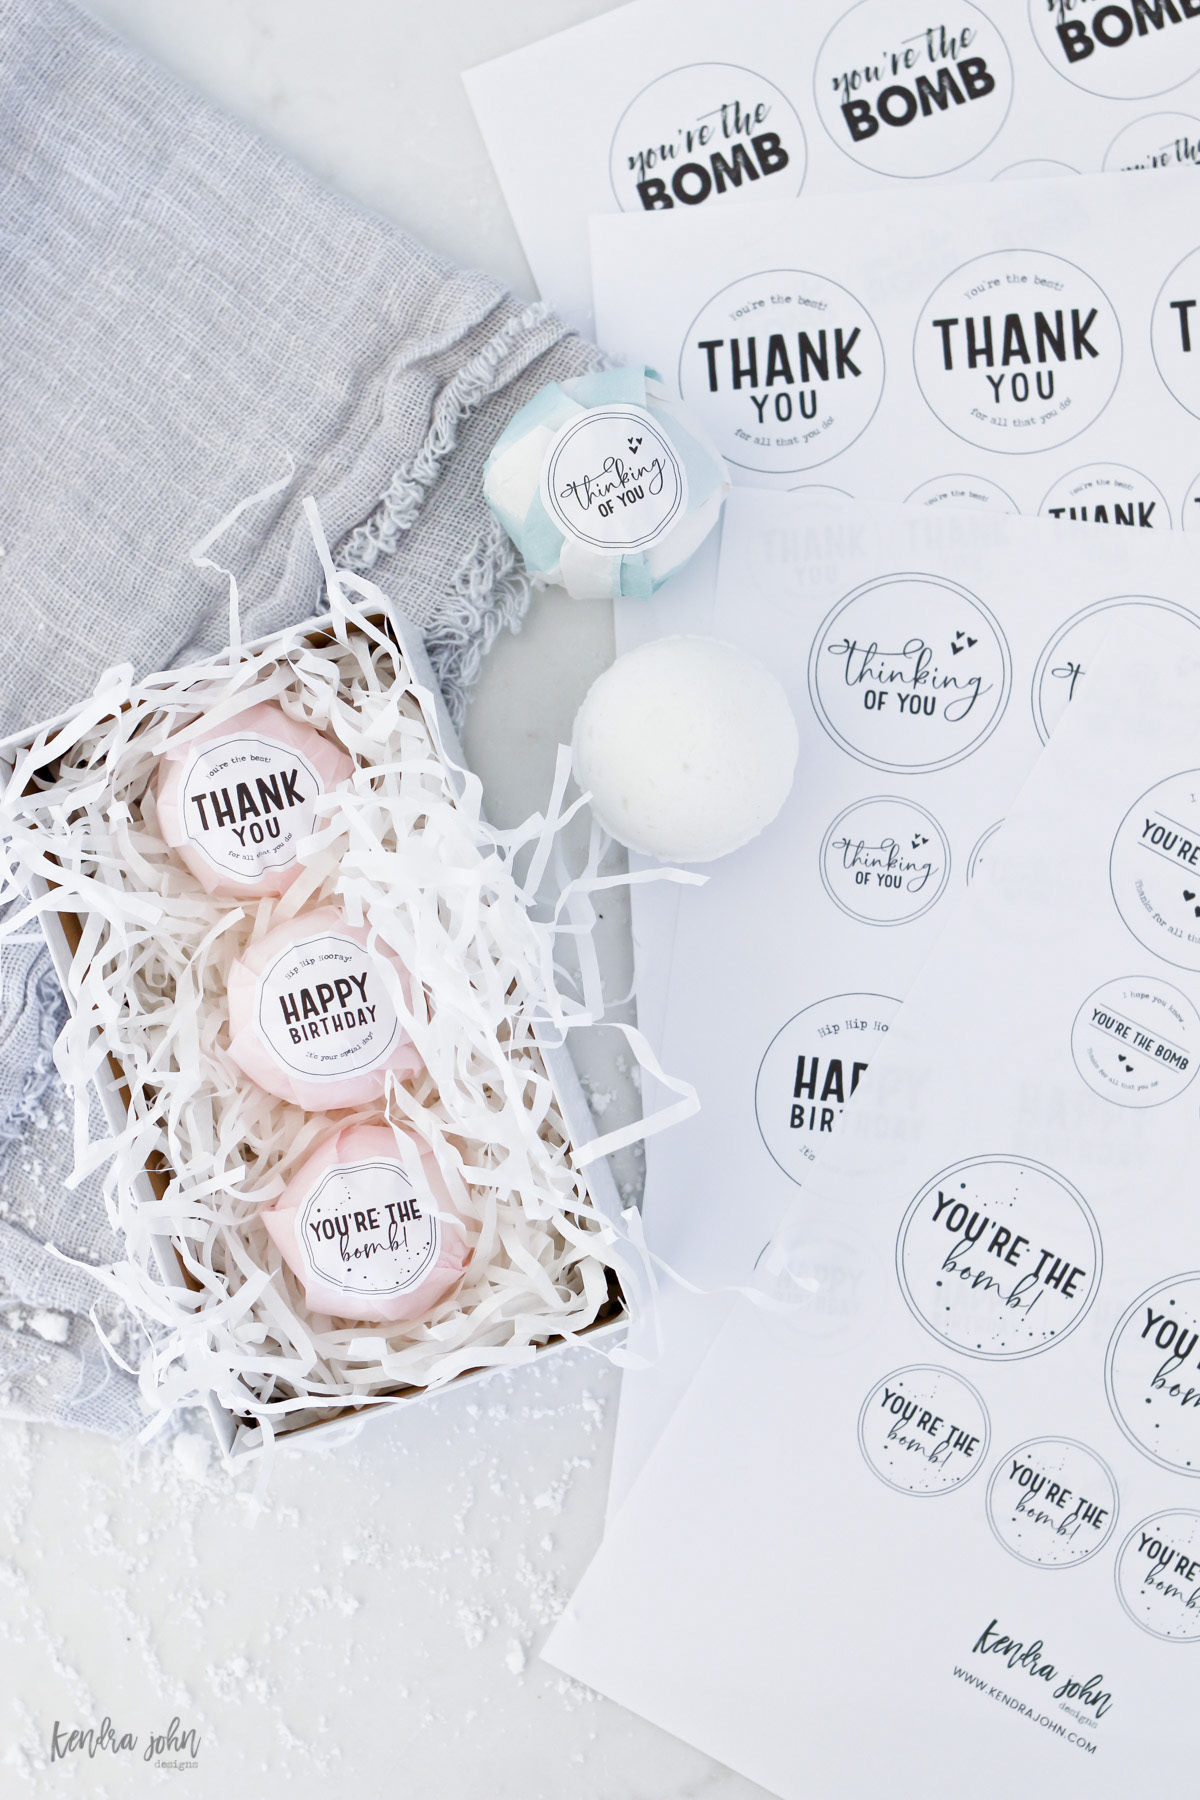 Bath bombs with free printable pages of gift tags
